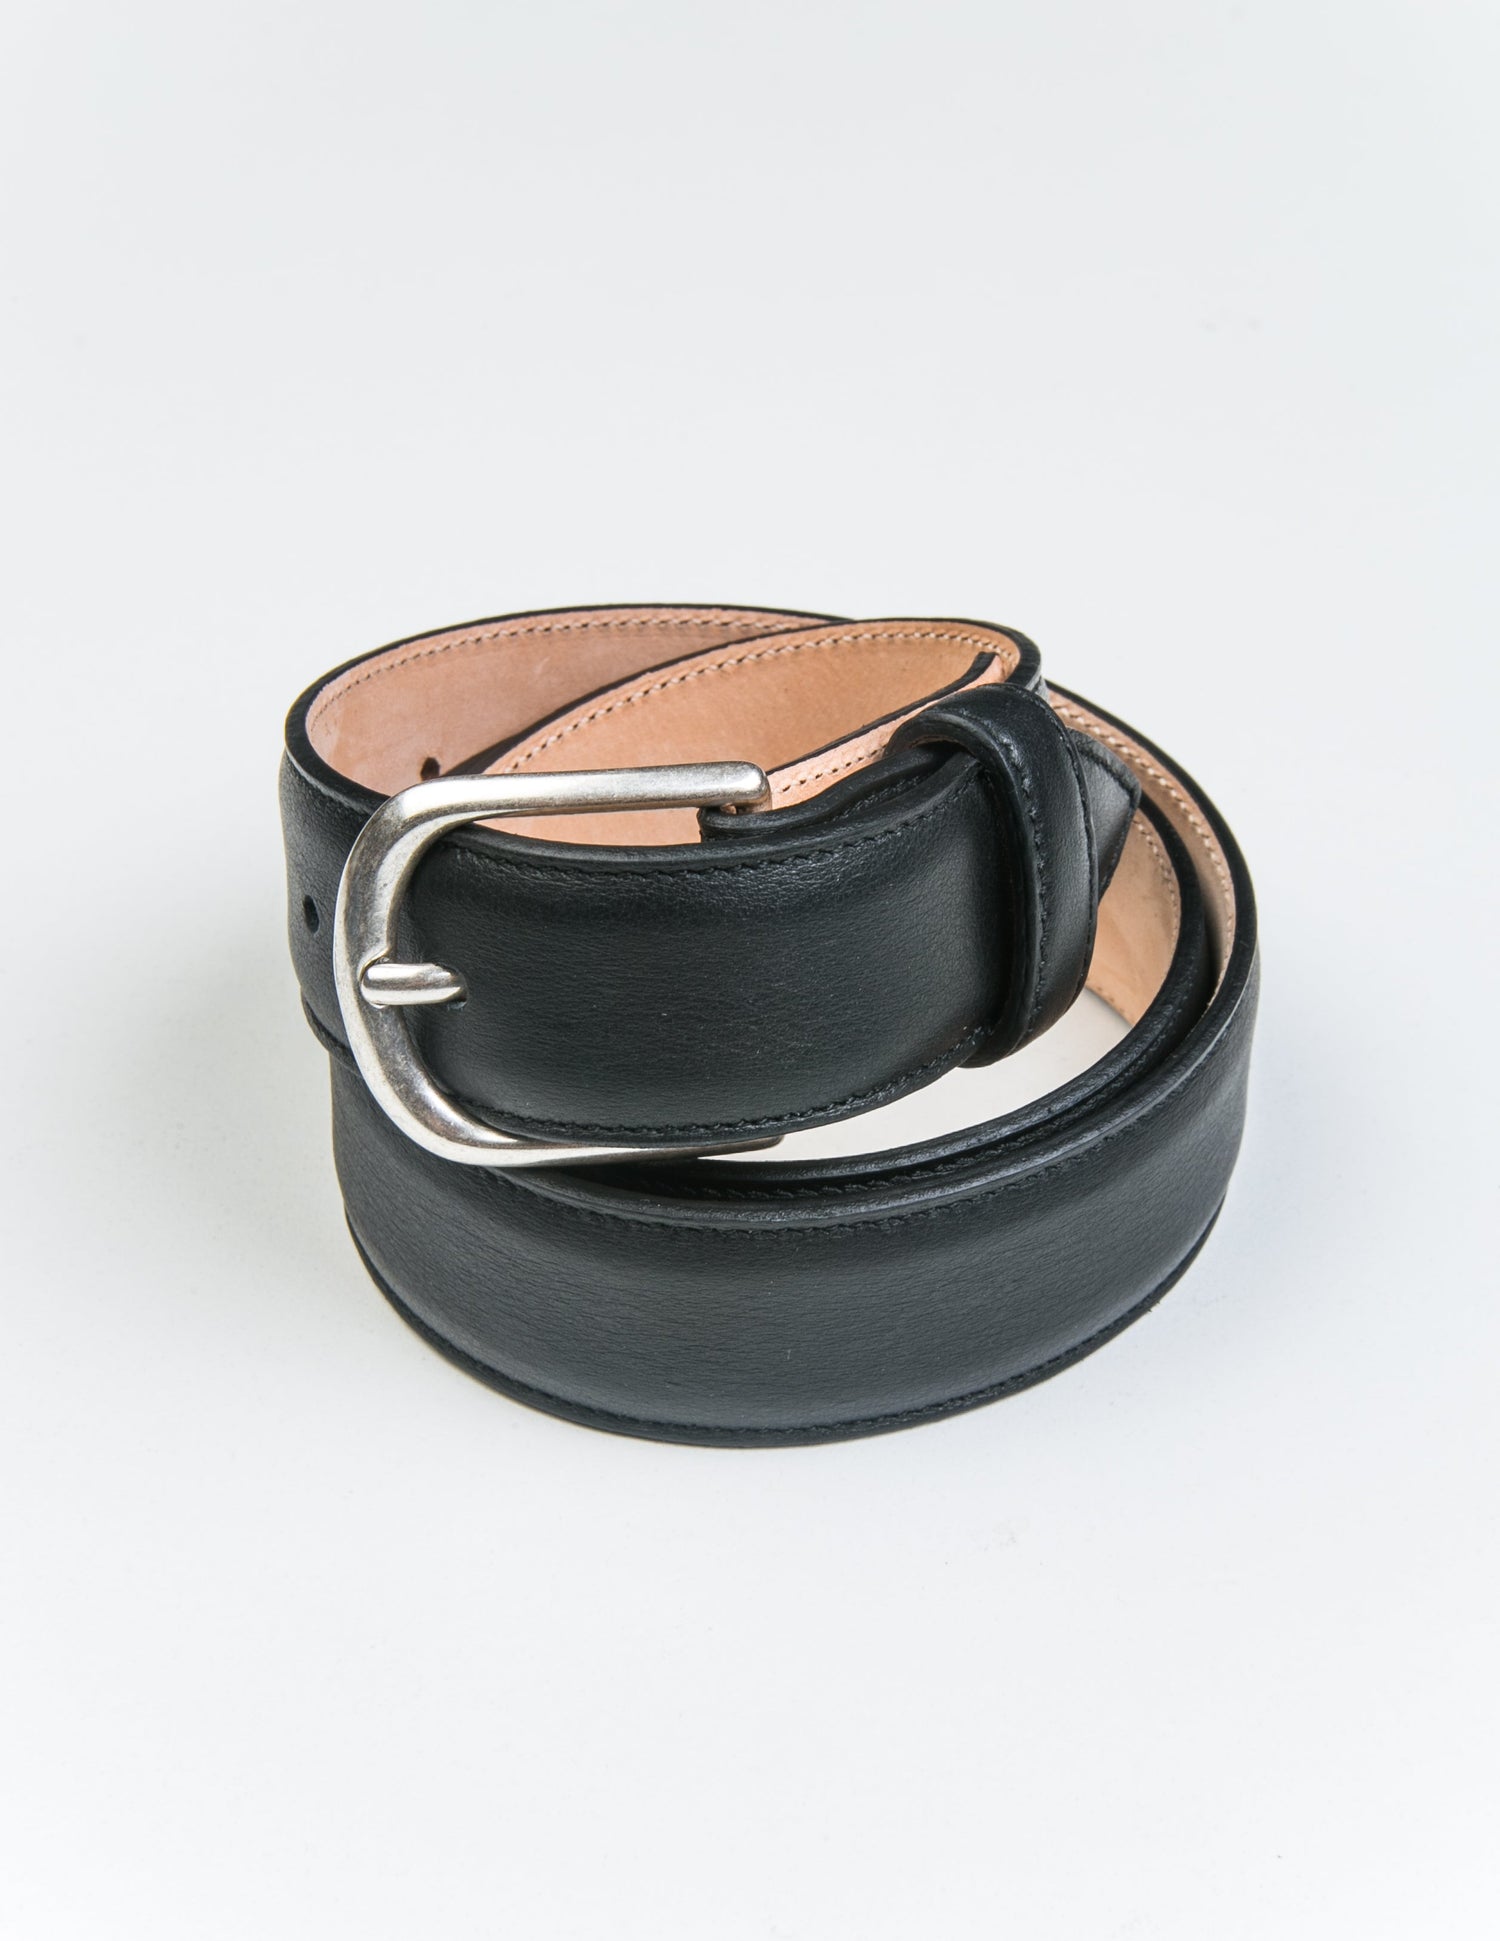 Photo of Brooklyn Tailors x Saddler's 30mm Belt in Smooth Leather - Black coiled up